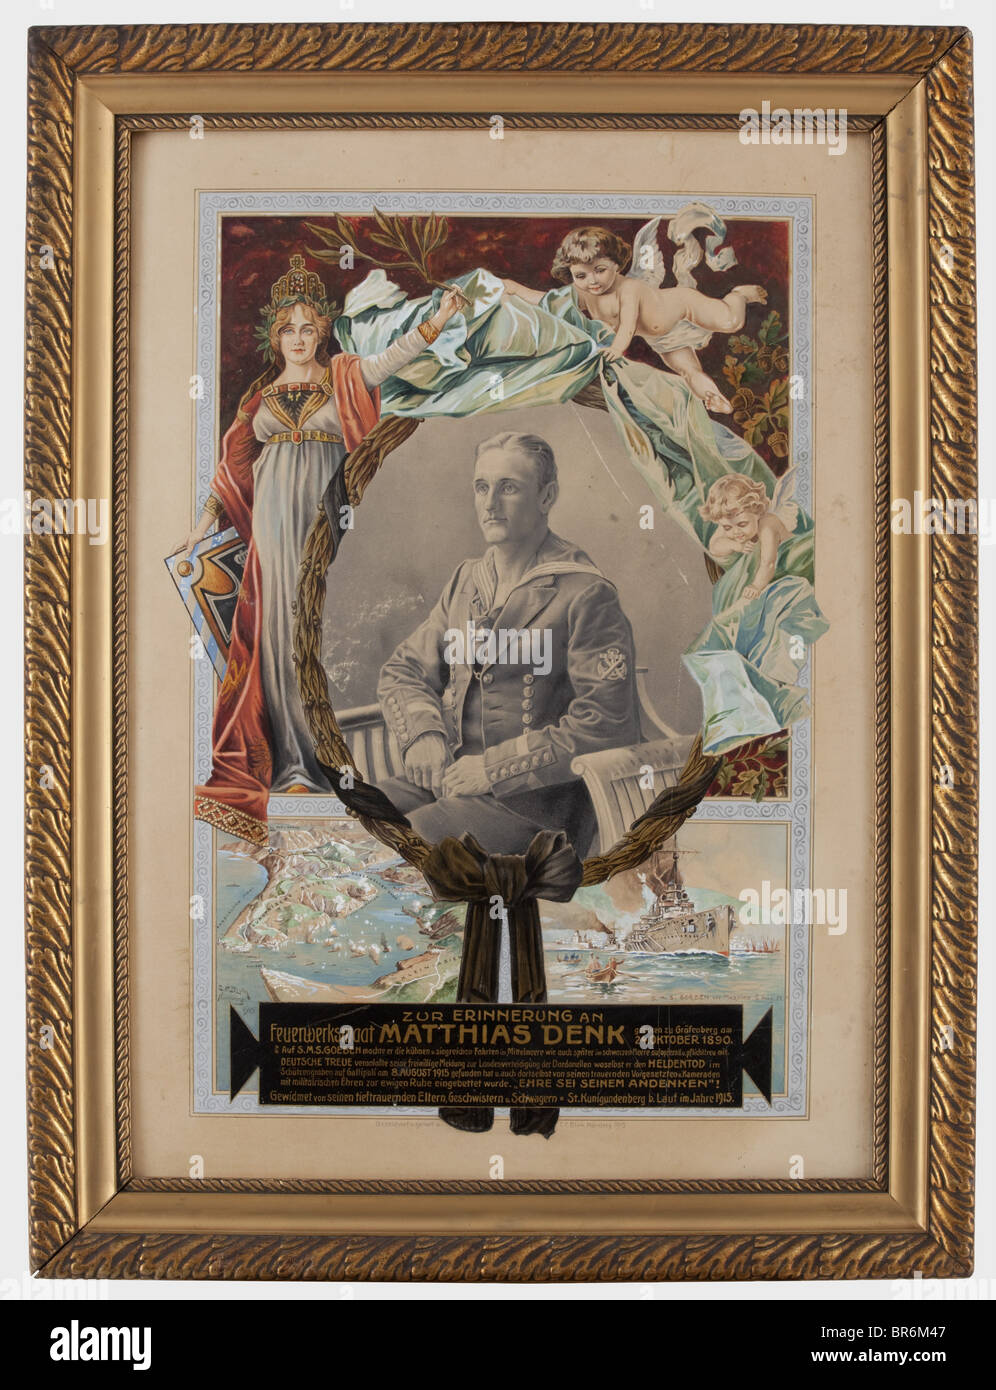 A commemorative picture of the artificer mate of the S.M.S. Goeben, killed in action on 8 August 1915 in a trench on Gallipoli after his voluntary enlistment to the land defence of the Dardanelles. In the centre a photograph of Denk in uniform, framed in watercolour paint with depictions of Germania and putti. In the lower section the Dardanelles and the 'SMS Goeben vor Messina 6. August 1915' (SMS Goeben at Messina 6 August 1915) as well as commemorative inscription. Signed 'C.F. Blum 1915', the passepartout inscribed 'Gezeichnet u. gemalt von C.F. Blum Nürnbe, Stock Photo